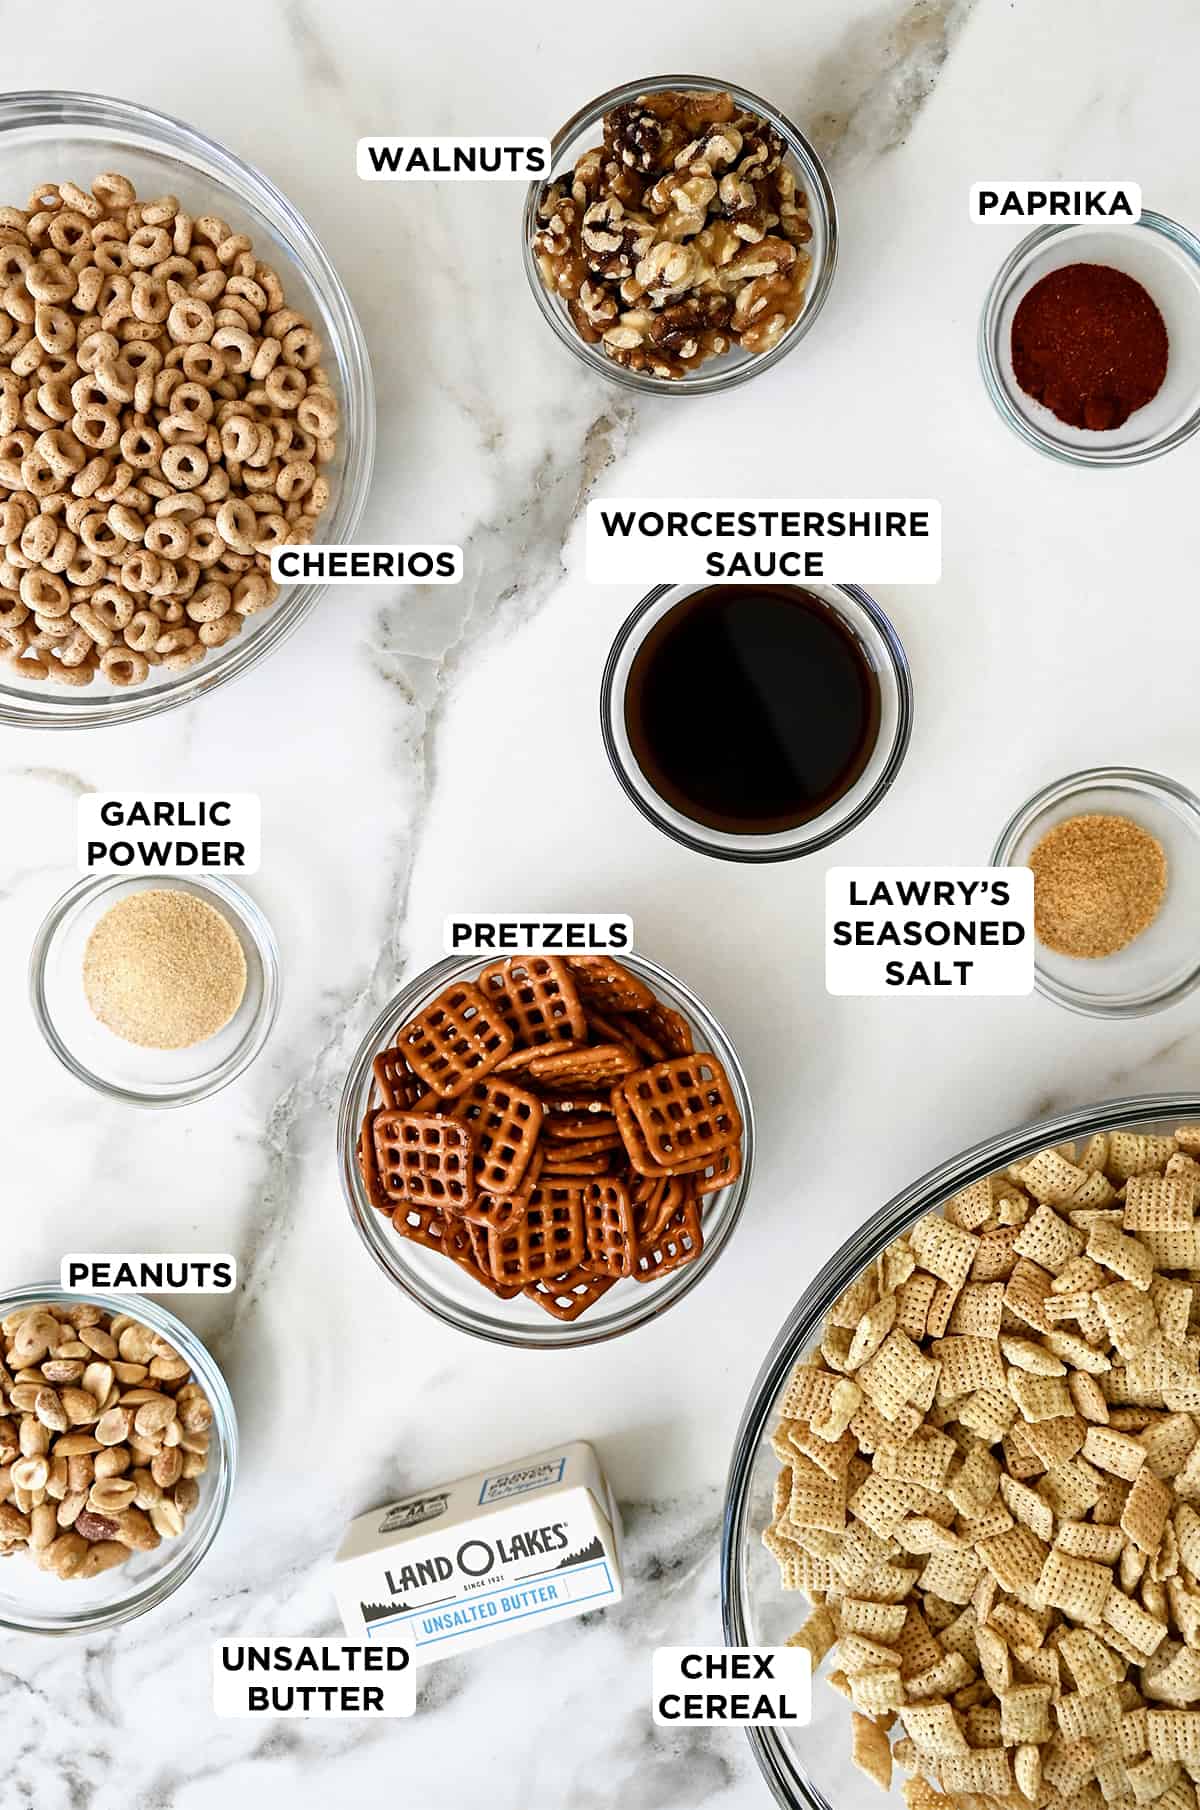 A stick of butter next to various sizes of clear bowls containing Cheerios, walnuts, paprika, Lawry’s Seasoned Salt, Chex cereal, pretzels, peanuts and garlic powder.